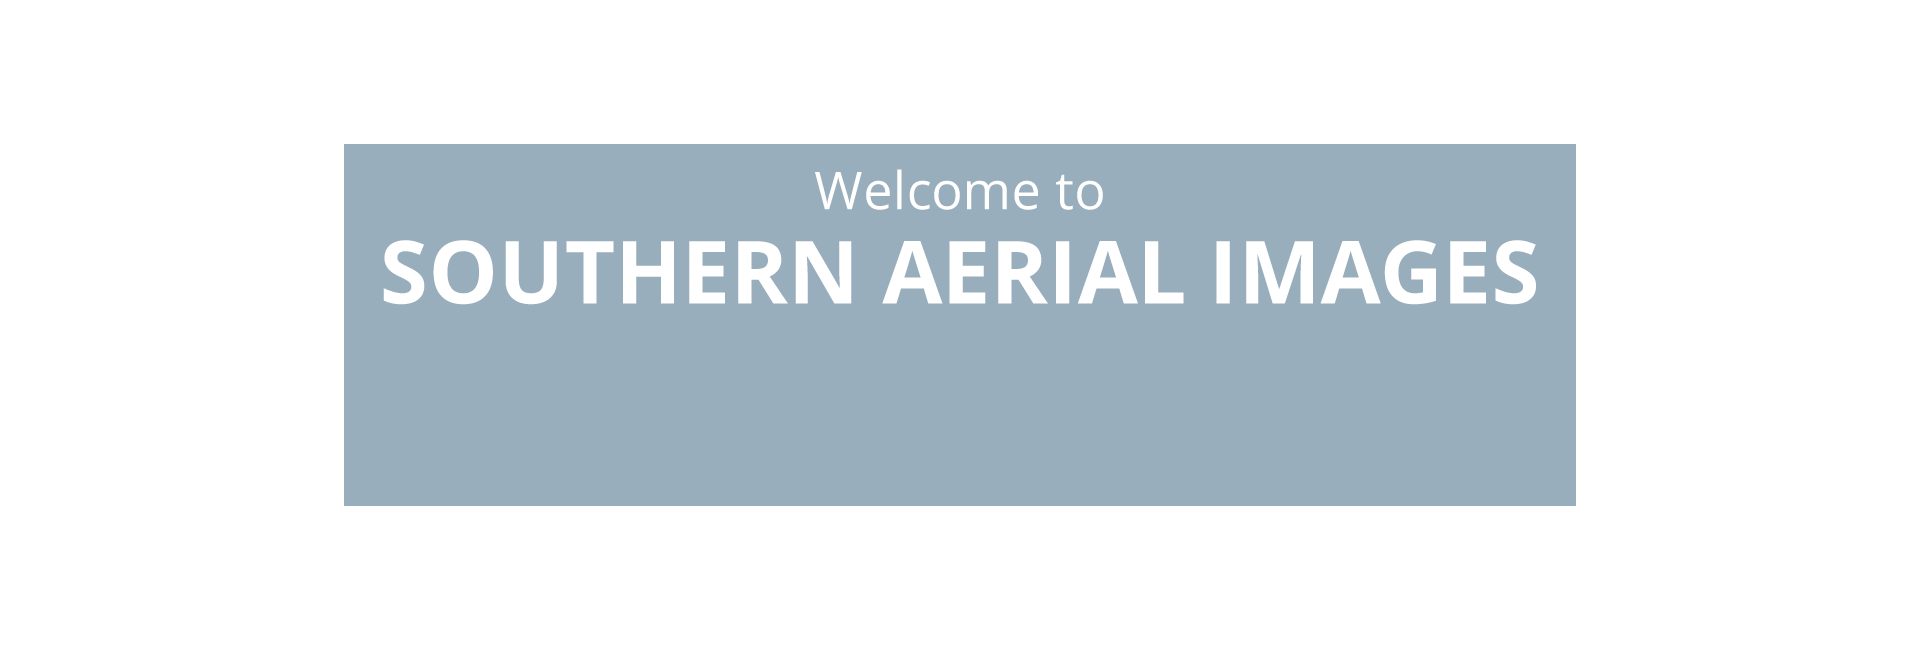 Welcome to Southern Aerial Images